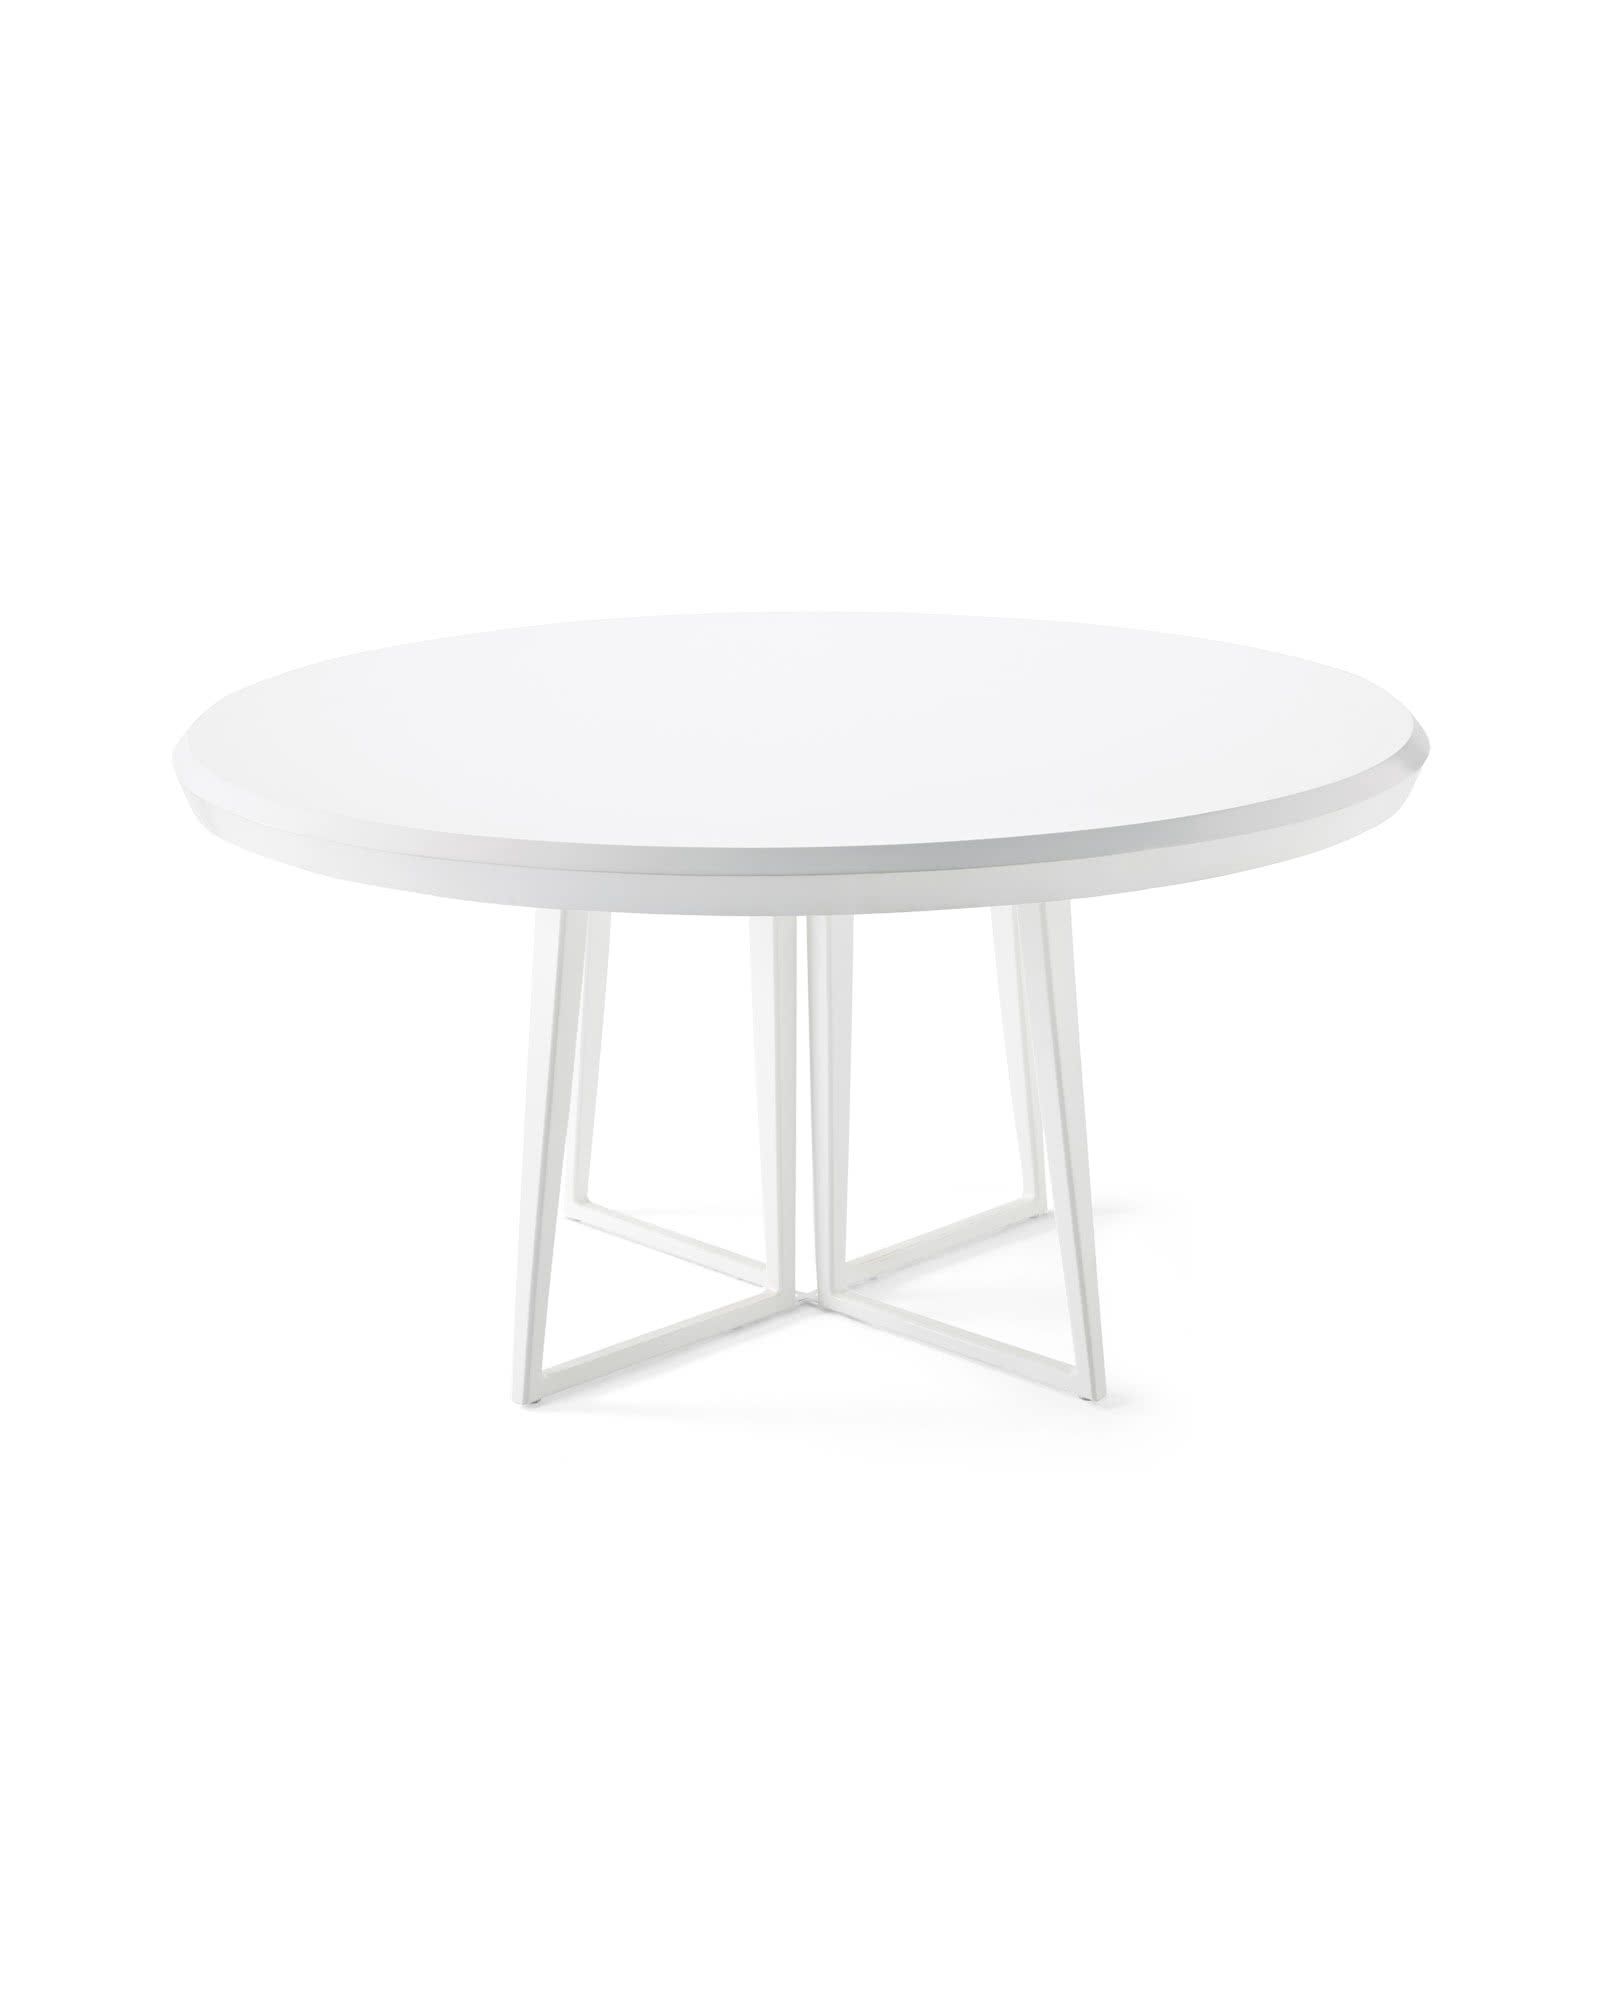 Downing 60" Dining Table | Serena and Lily